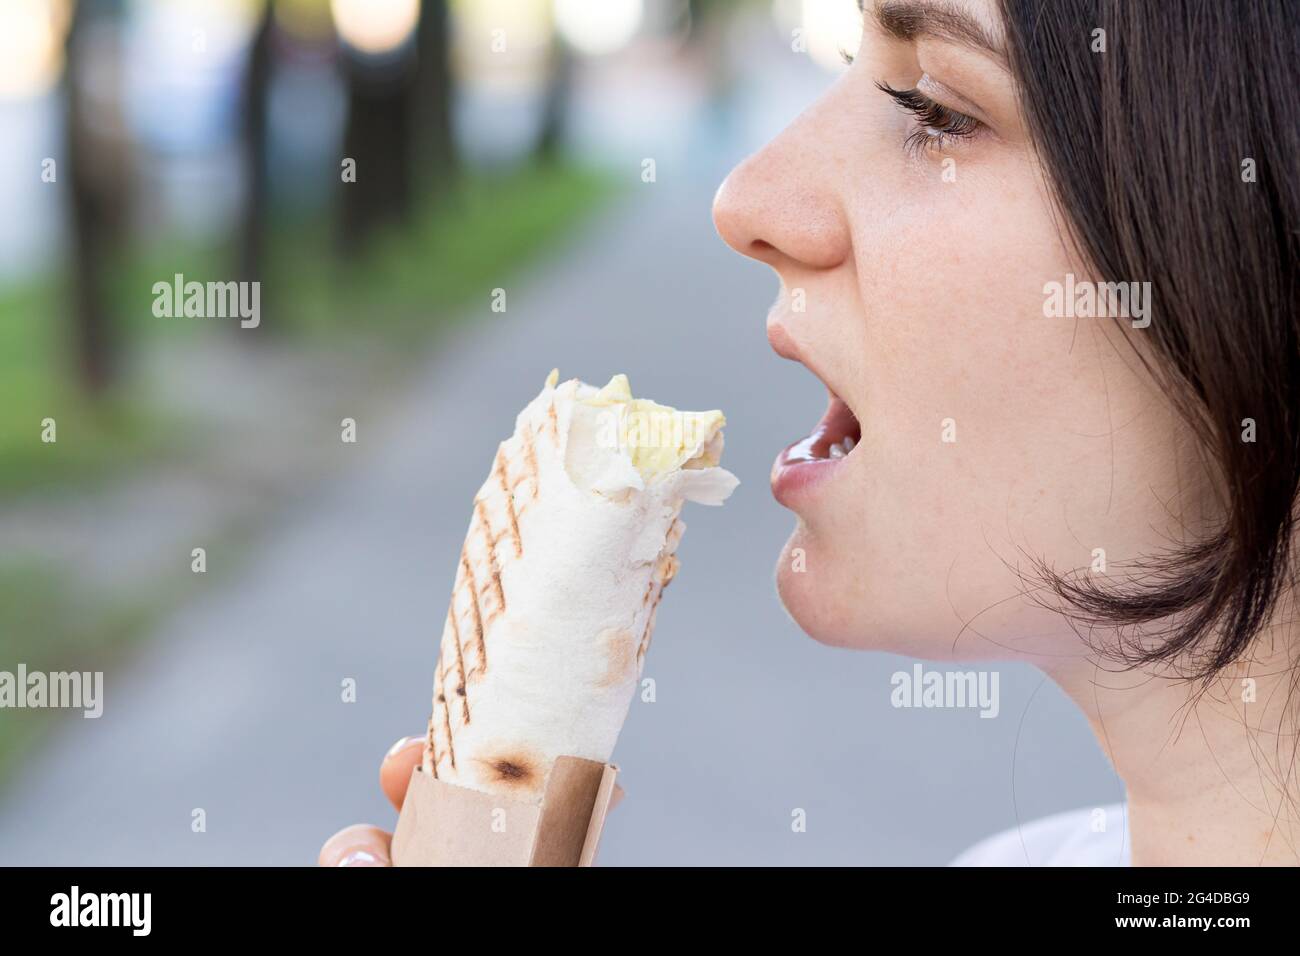 Beautiful woman eating shawarma on a city street. Fast food on the way to work or school. Place for text. Stock Photo